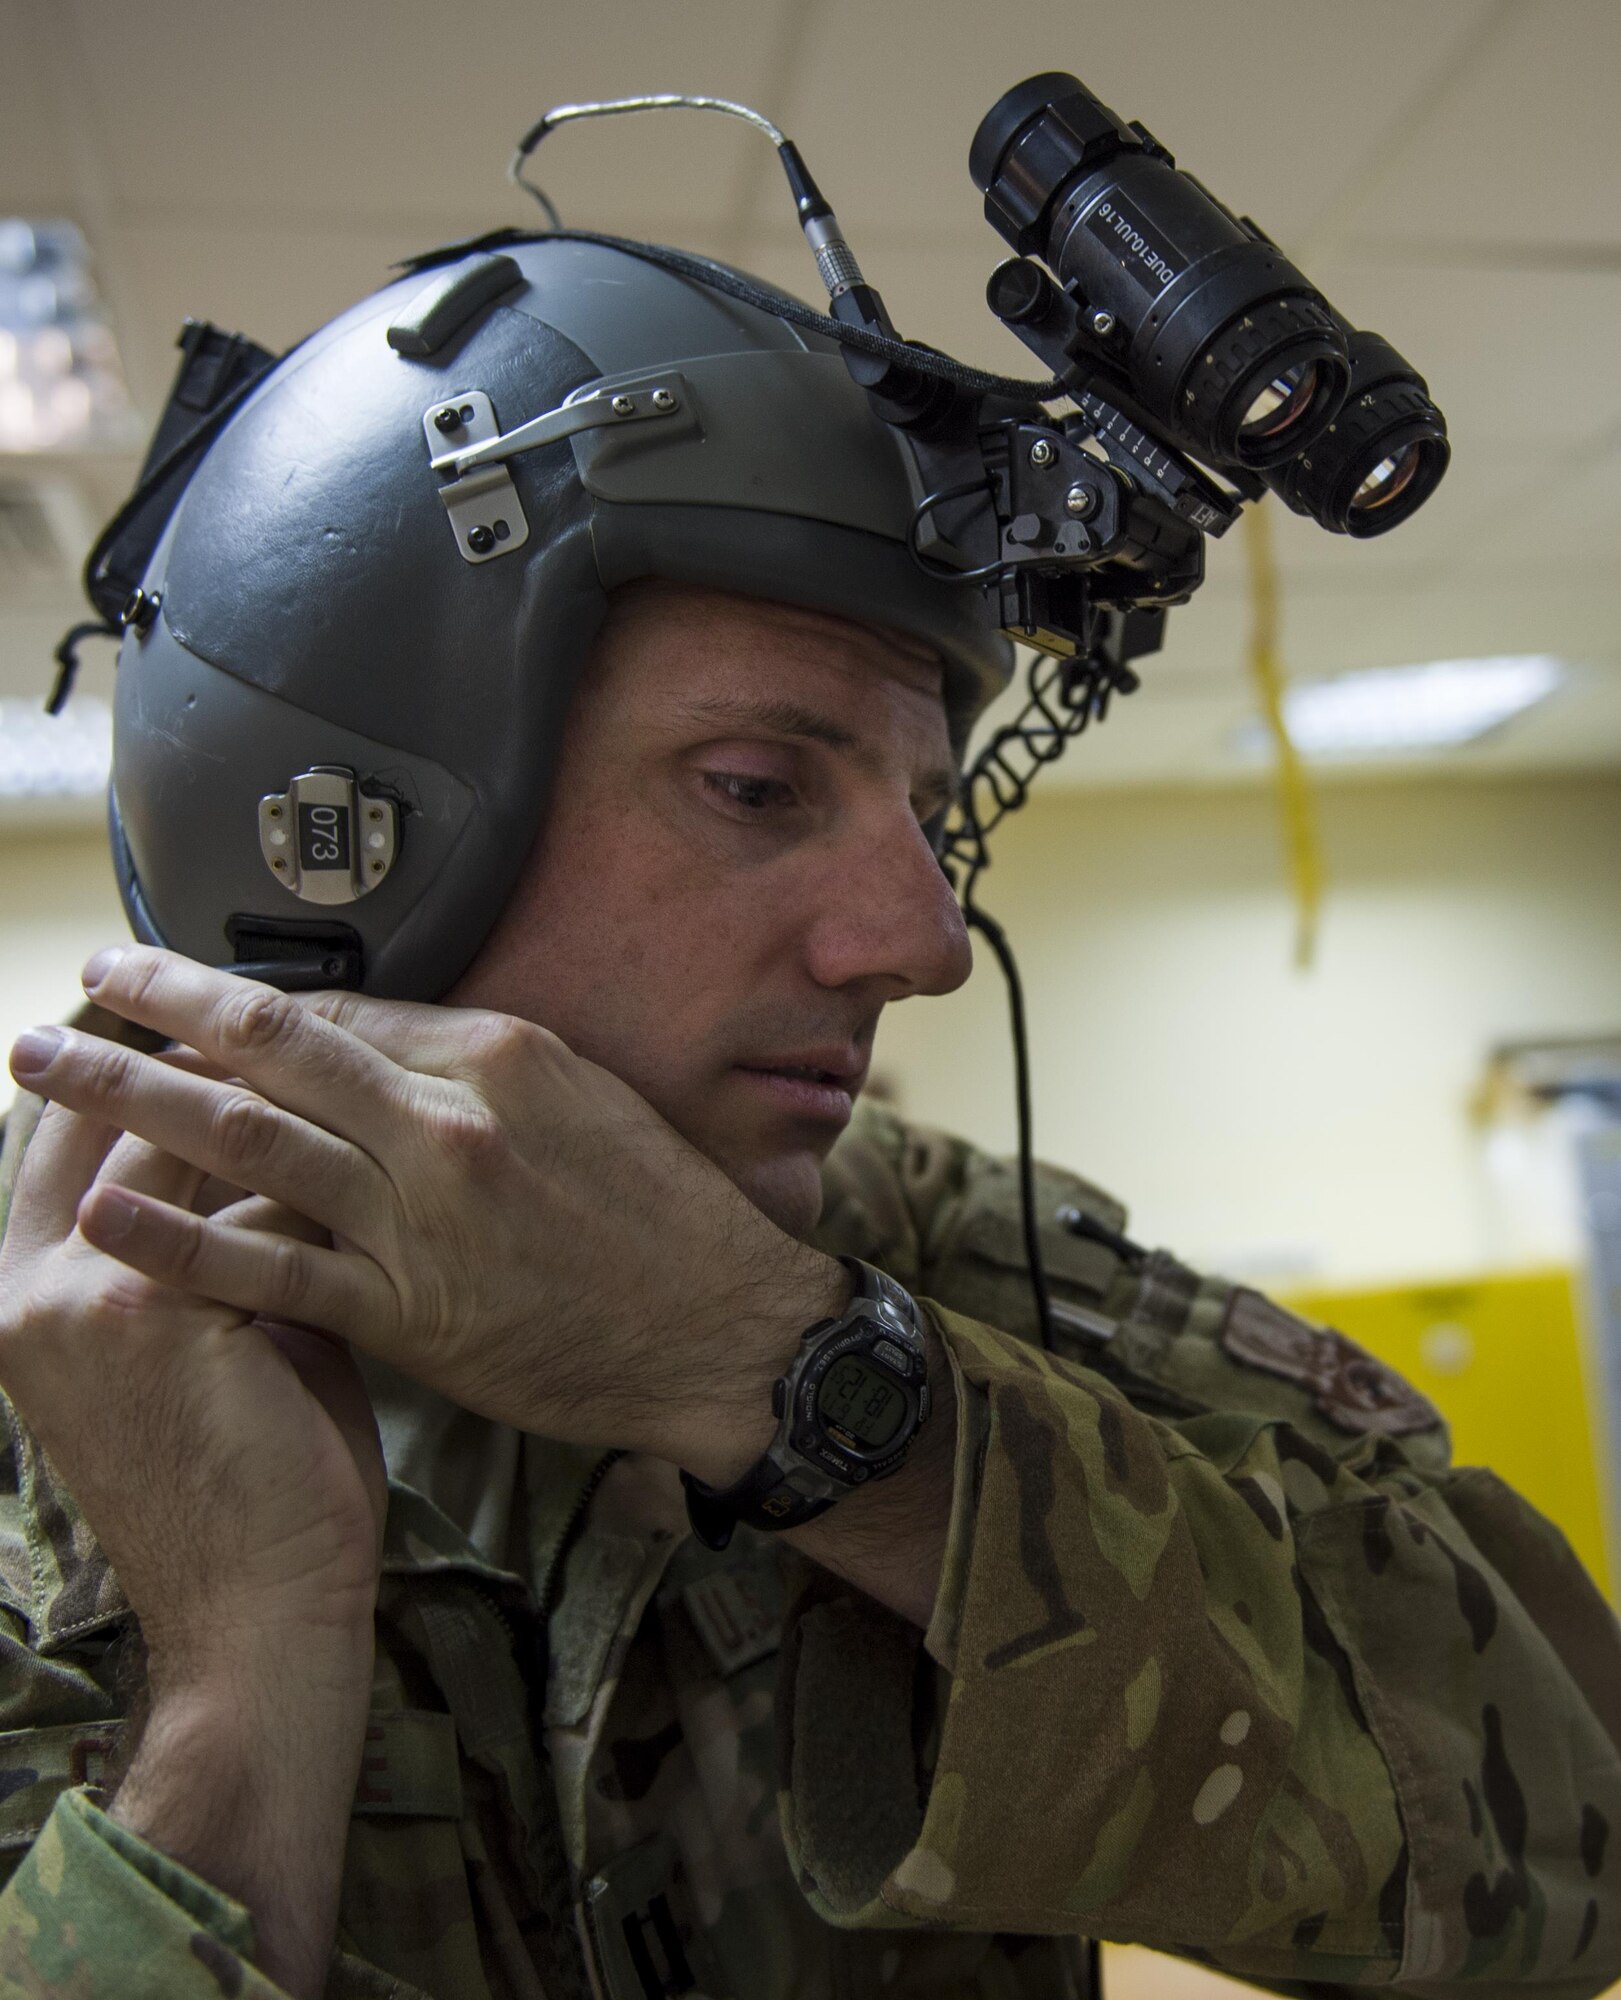 U.S. Air Force Capt. Jason Guinnee, 737th Expeditionary Airlift Squadron C-130 pilot from the Alaska Air National Guard's 144th Airlift Squadron, fastens his helmet before flying a transport mission at undisclosed location in Southwest Asia, June 17, 2016. The transport mission was one of the last combat missions during the 144th AS's final C-130 deployment. (U.S. Air Force photo by Staff Sgt. Douglas Ellis/Released)